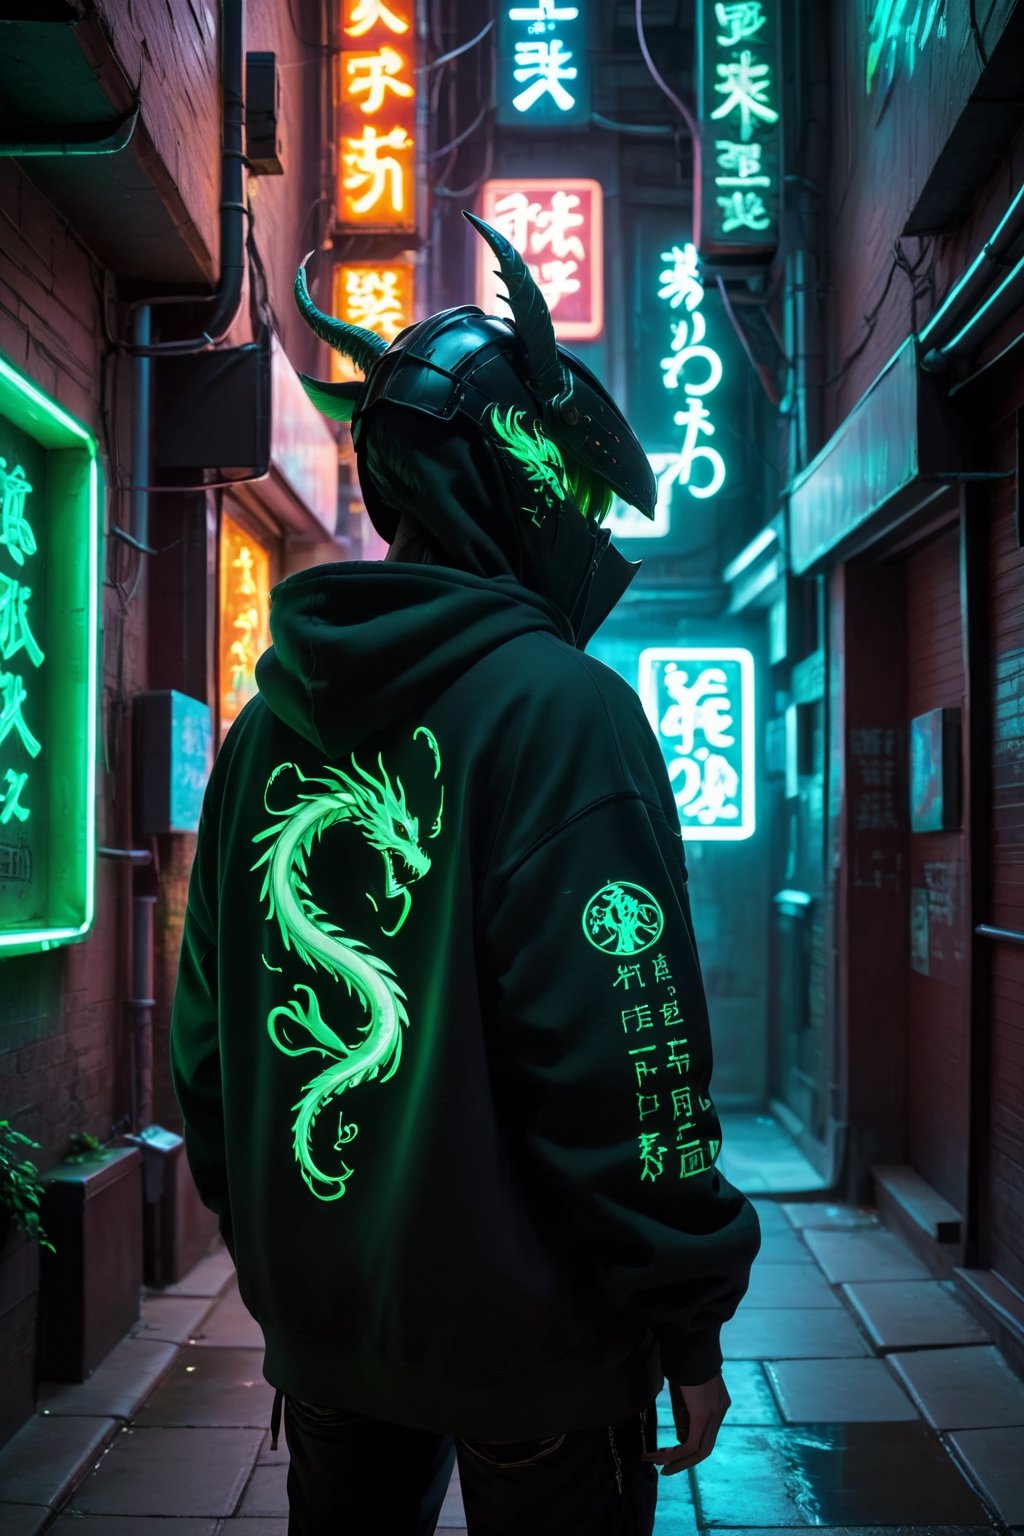 a figure from the back wearing a hoodie with a neon green glowing design of a dragon on it. The figure is standing in an alleyway with various neon signs and symbols on the walls, which contribute to a cyberpunk aesthetic. its vibrant color contrast and the incorporation of futuristic elements.